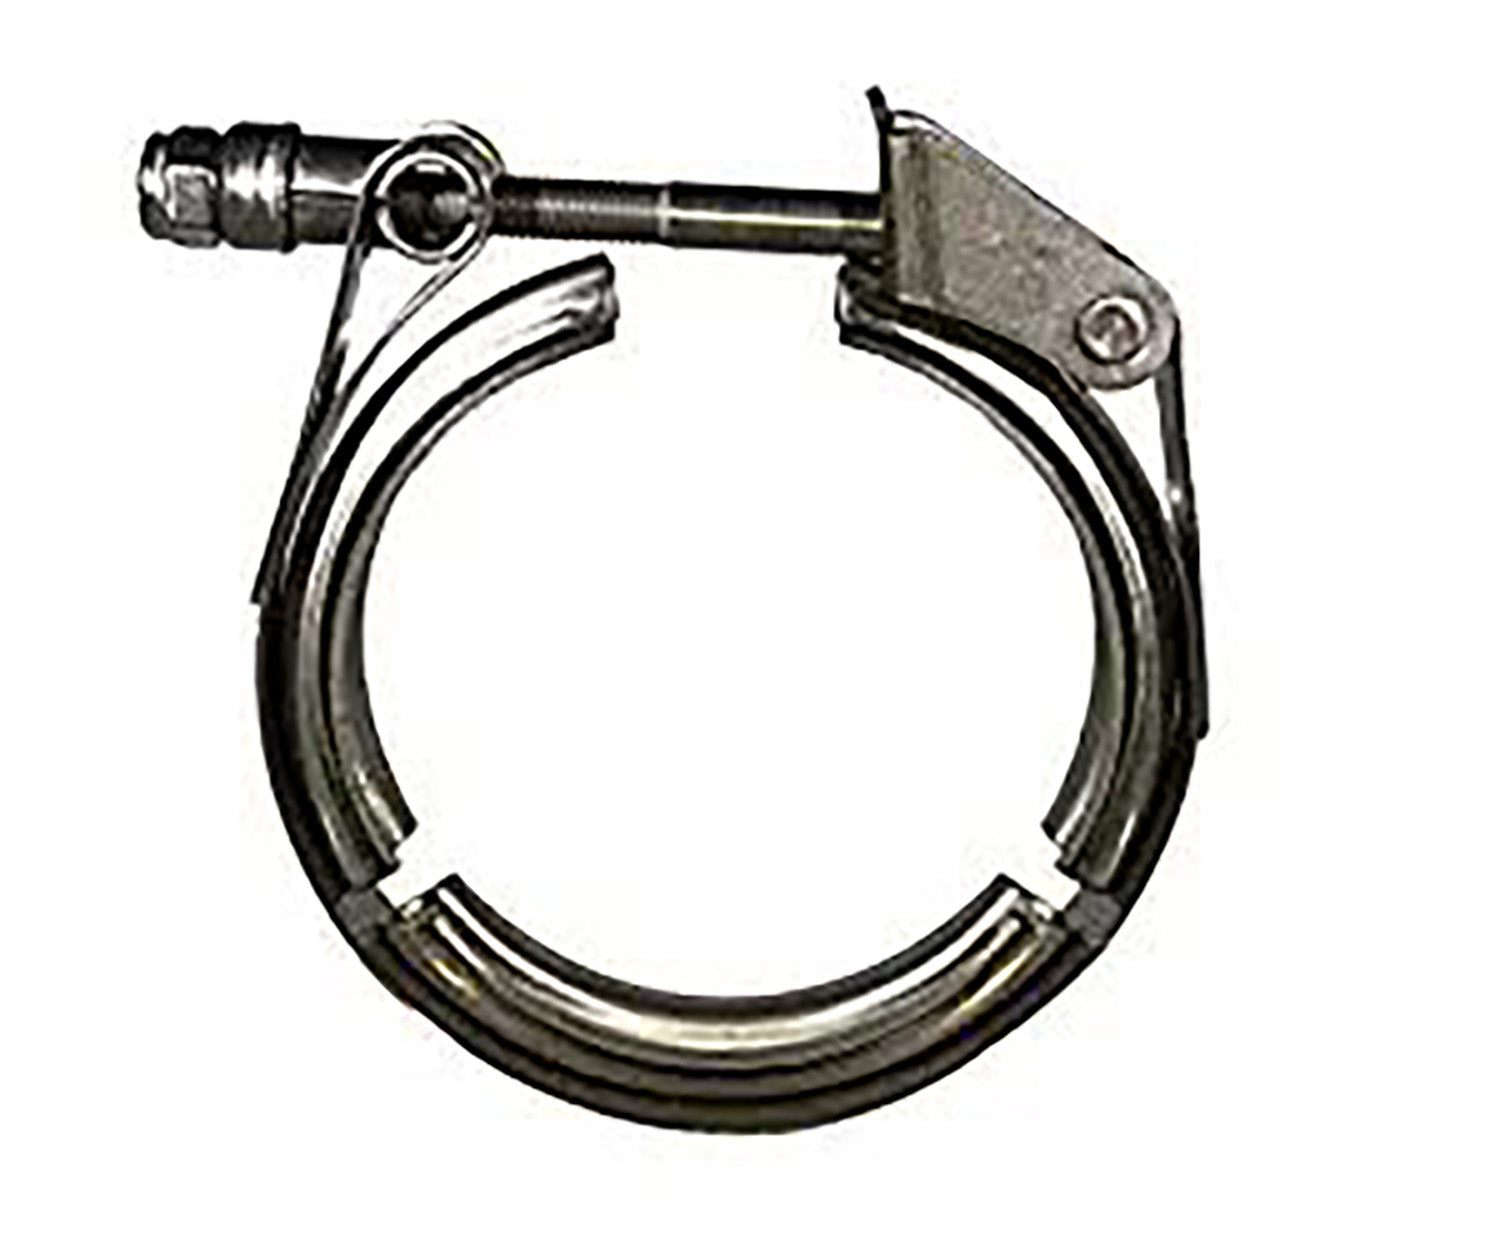 3.00" V Band Clamp Stainless Steel